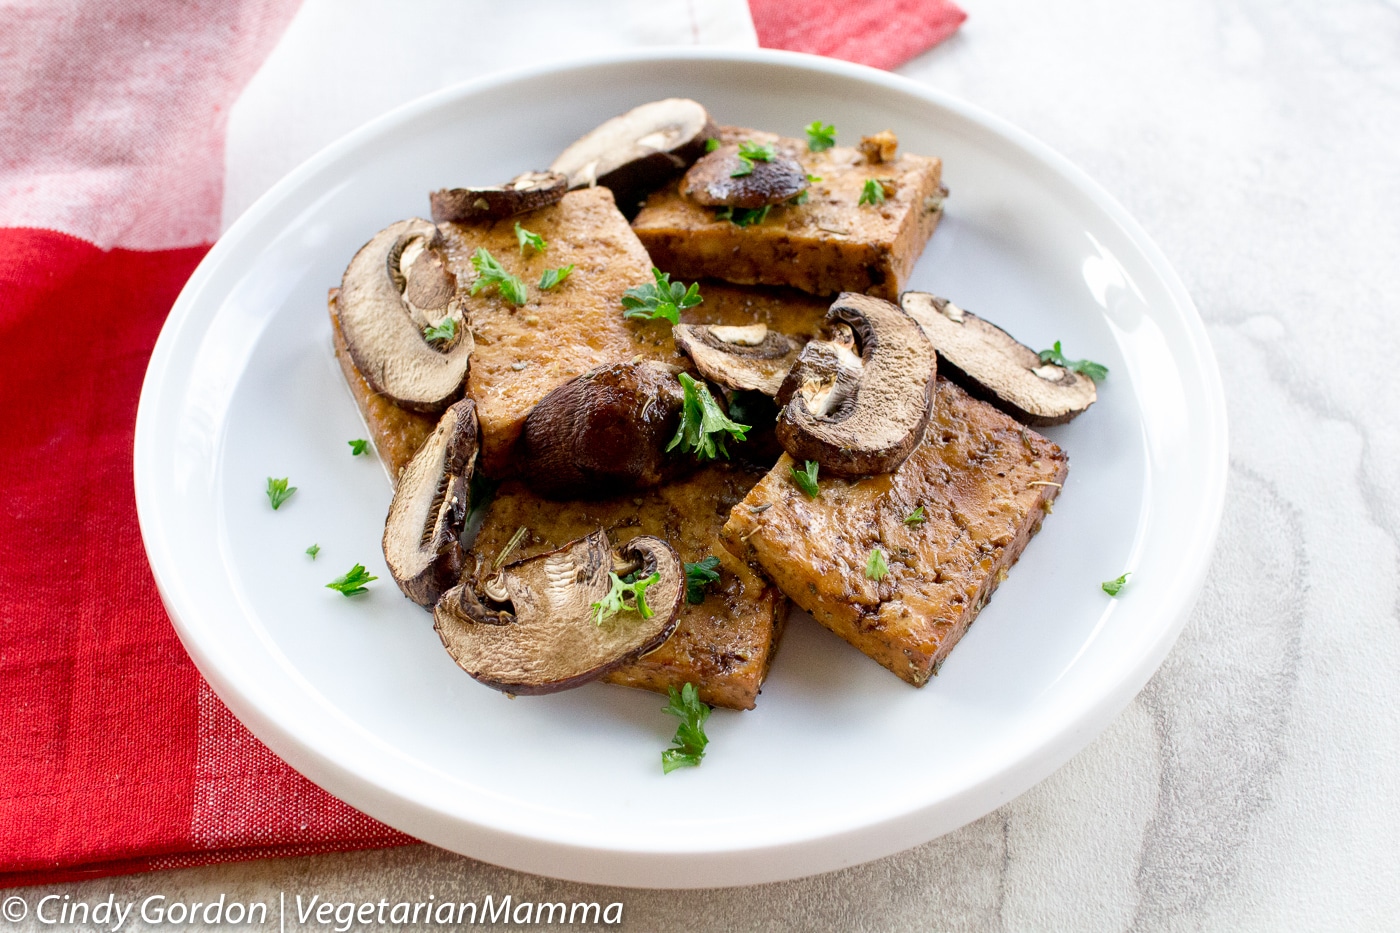 Balsamic Tofu and Mushrooms is a beautiful dish that brings a satisfying earthy flavor to your dinner table.  This is an easy weeknight meal.